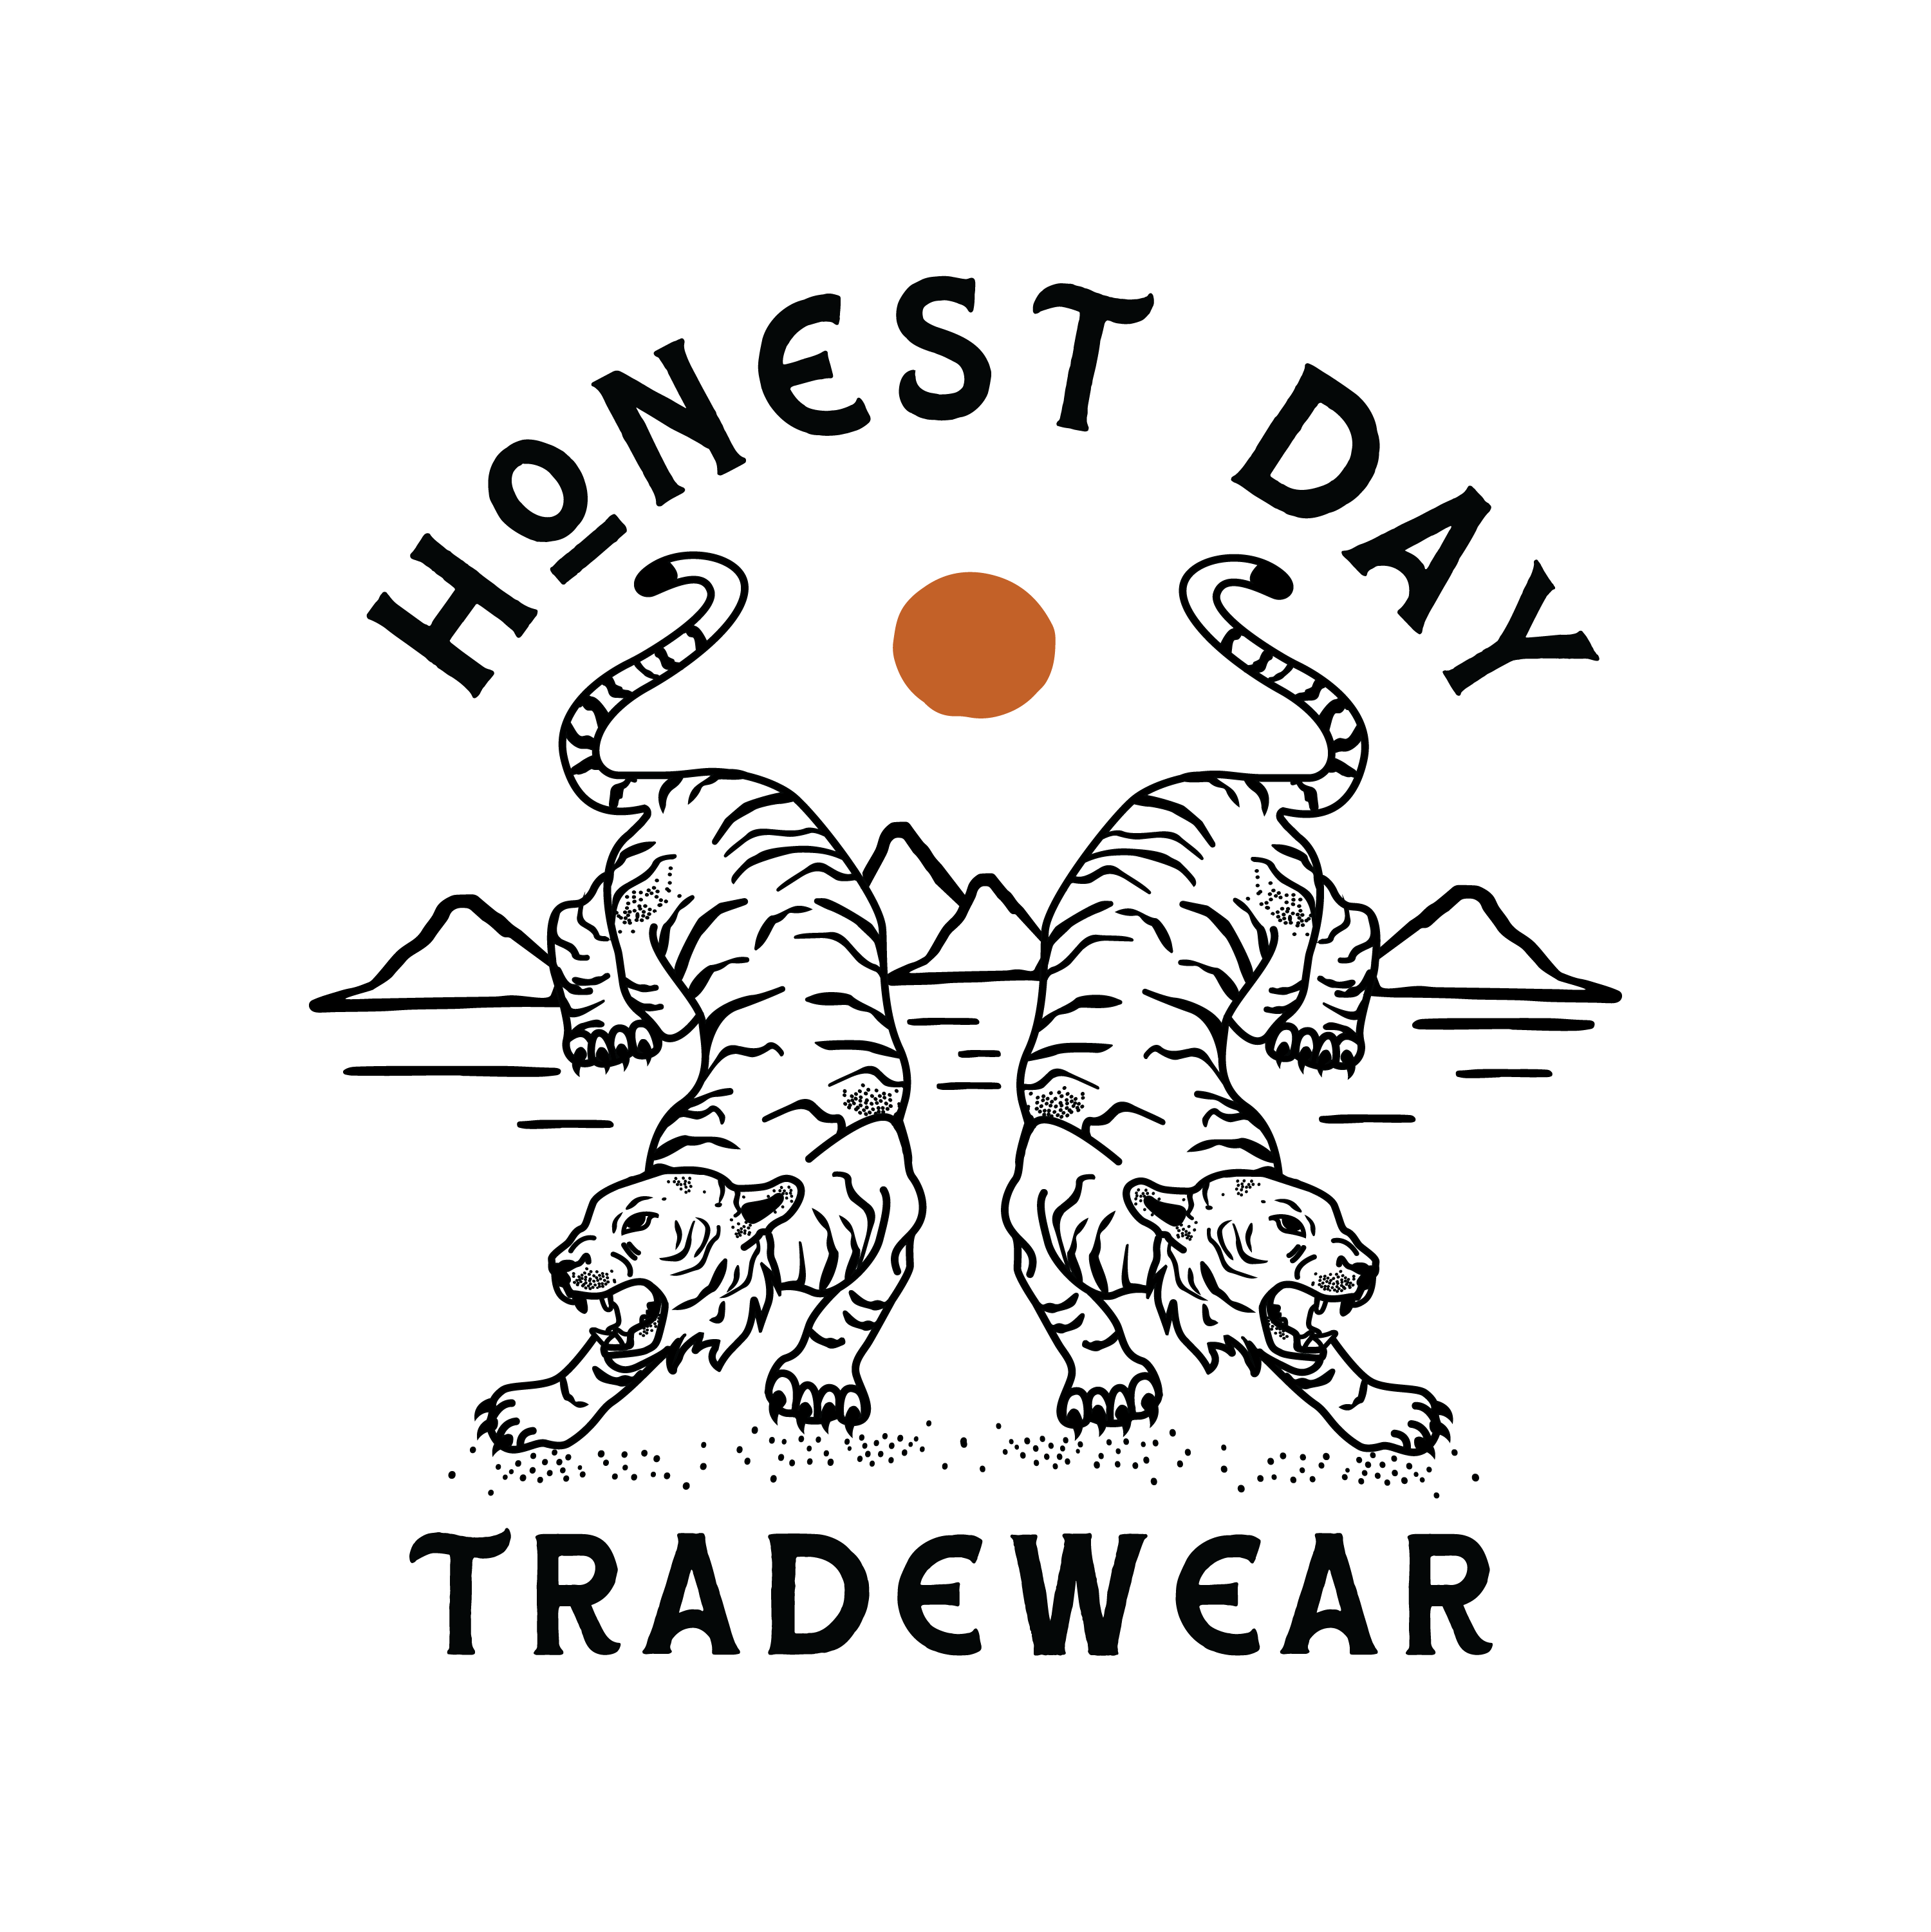 Honest Day Tradewear 2 logo design by logo designer Daphna Sebbane for your inspiration and for the worlds largest logo competition